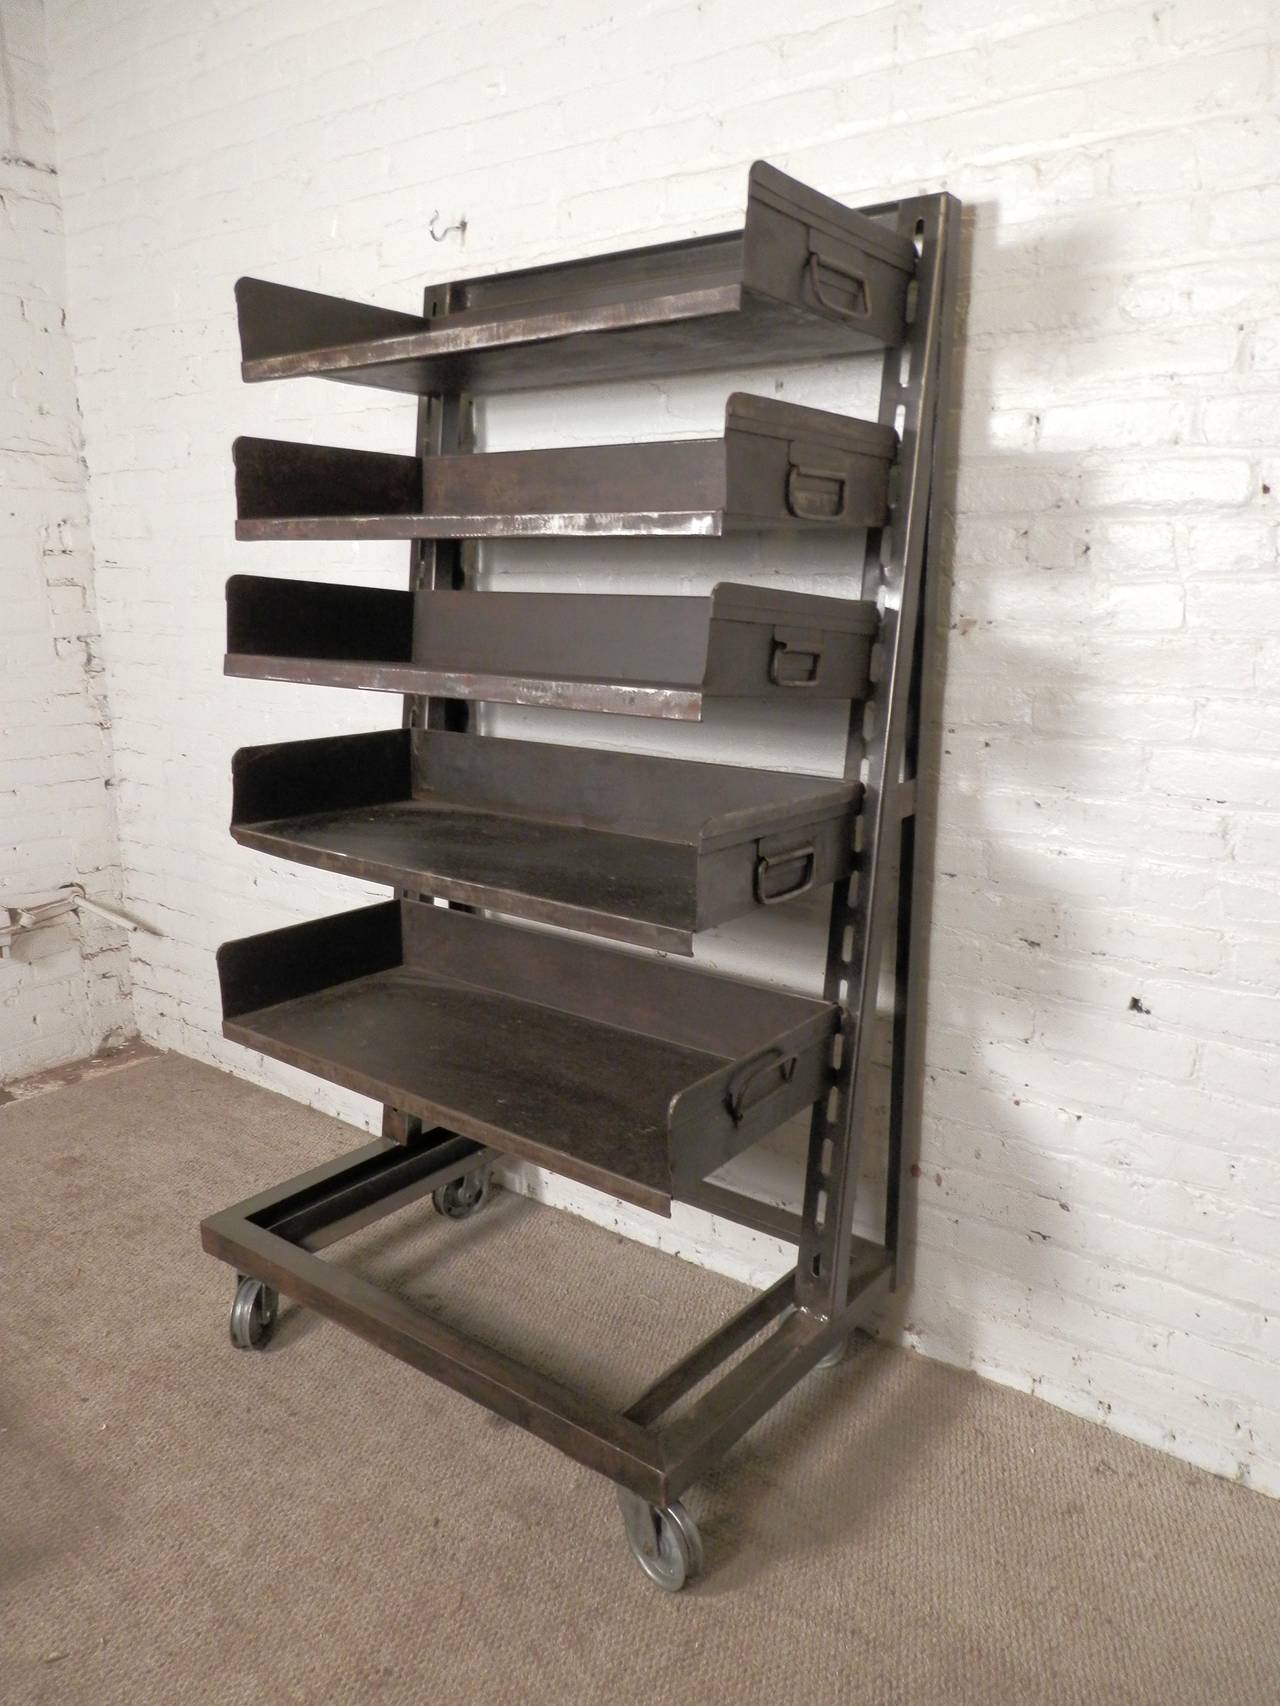 Unique factory shelving unit on metal casters. Heavy duty adjustable shelves with handles. Makes for a great bookshelf or kitchen pantry.

(Please confirm item location - NY or NJ - with dealer)